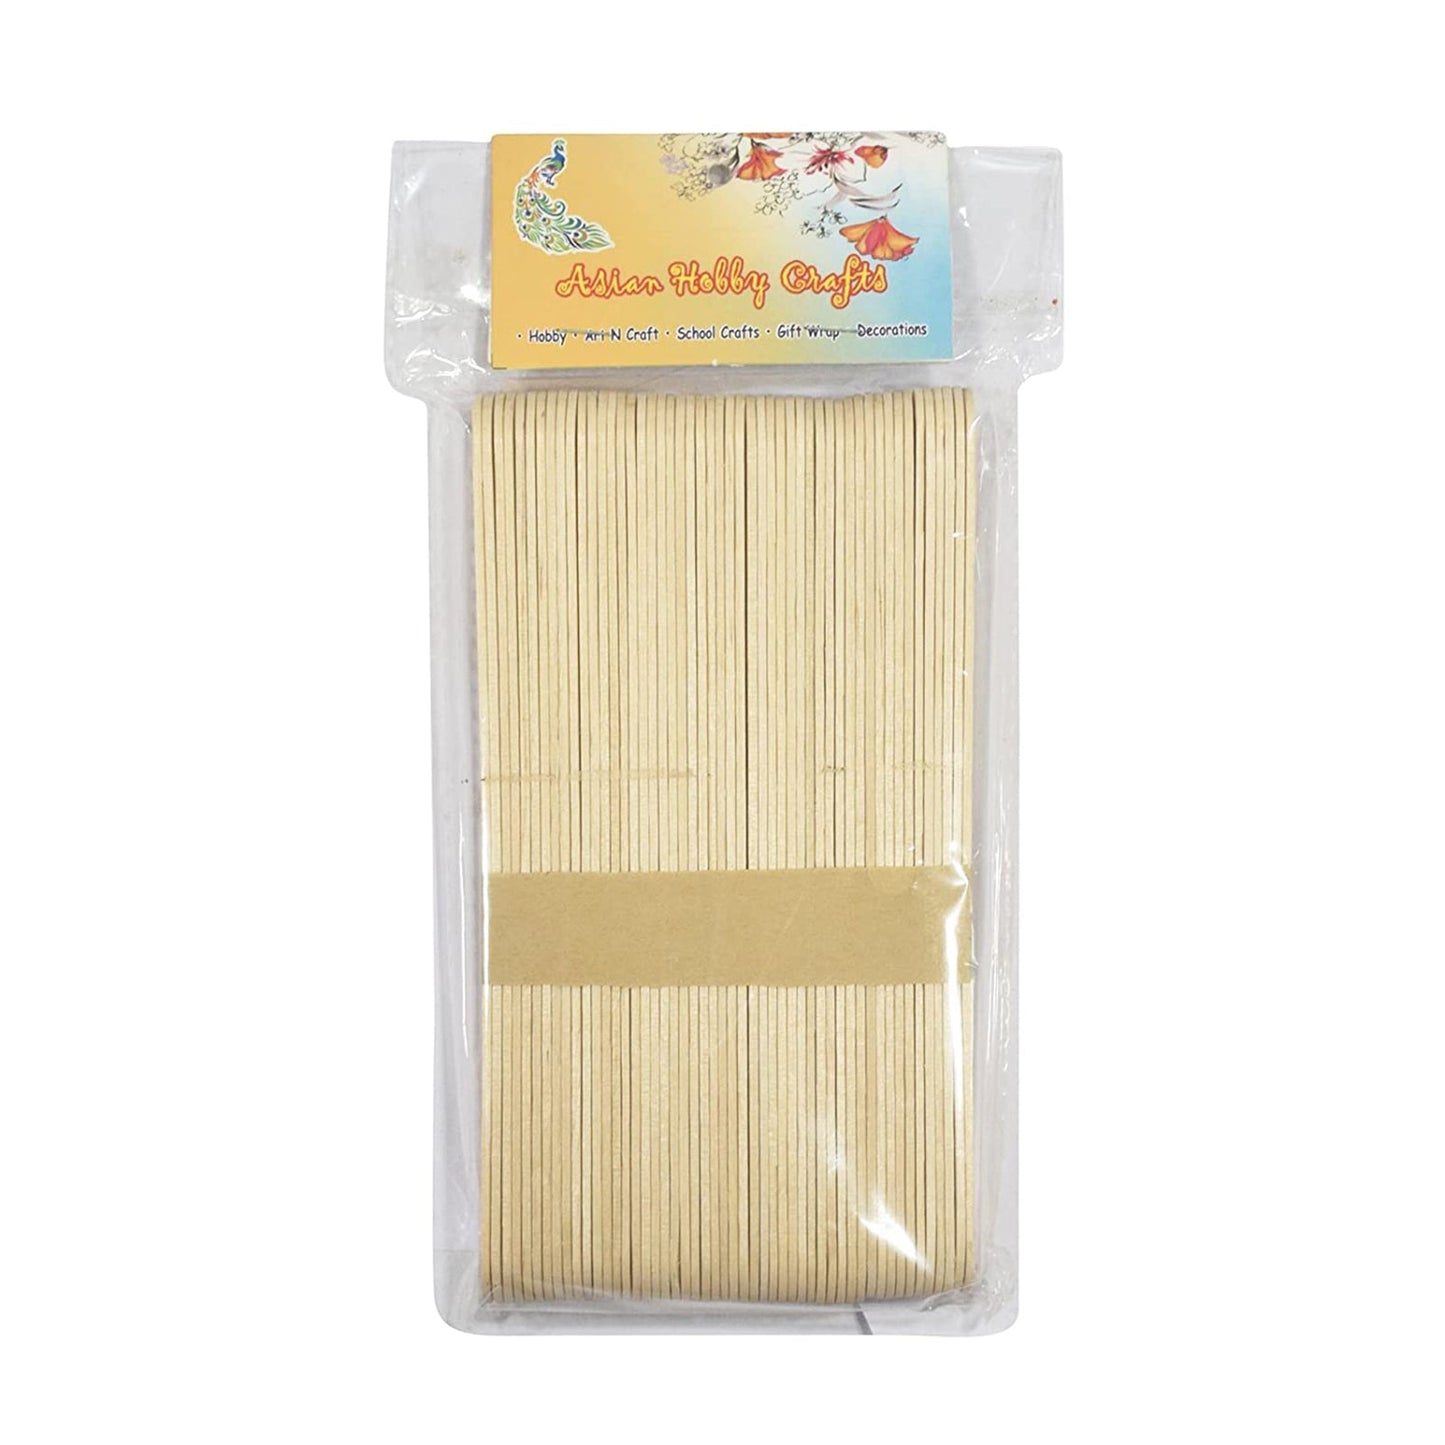 Wooden Ice Cream Sticks Pack of 50, Natural Color, Size - 15 CM